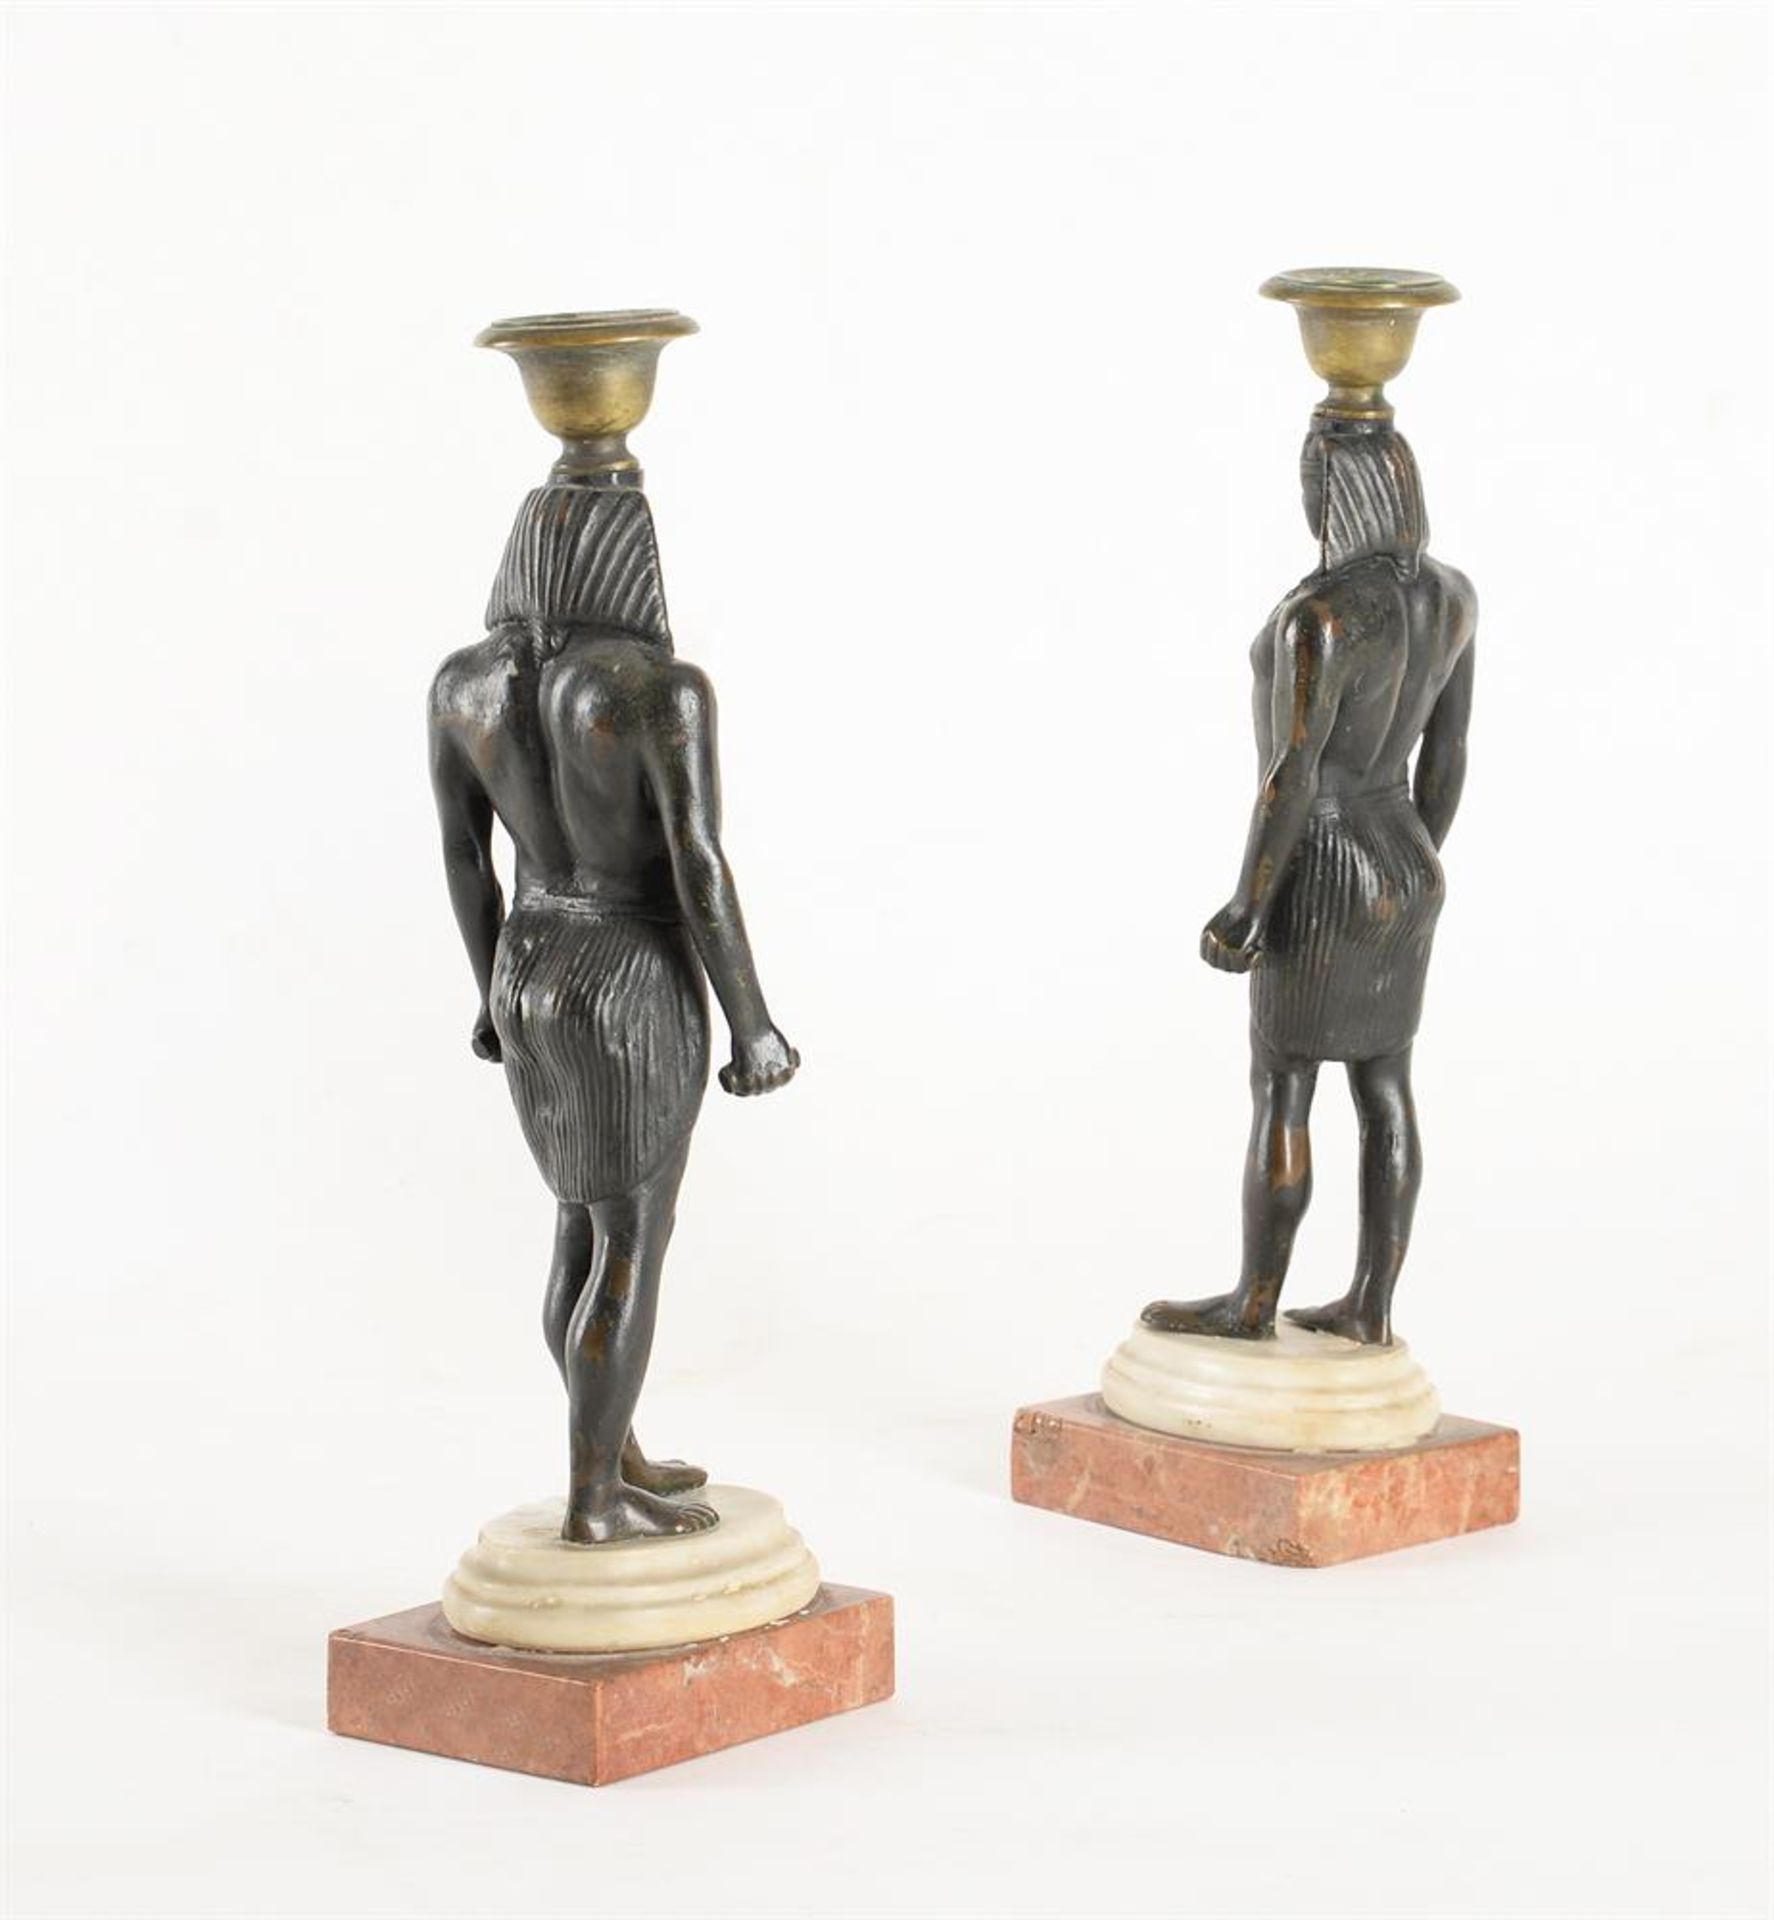 A PAIR OF BRONZE CANDLESTICKS IN THE FORM OF ANTINOUS AS OSIRIS, ITALIAN OR FRENCH, 19TH CENTURY - Image 5 of 5